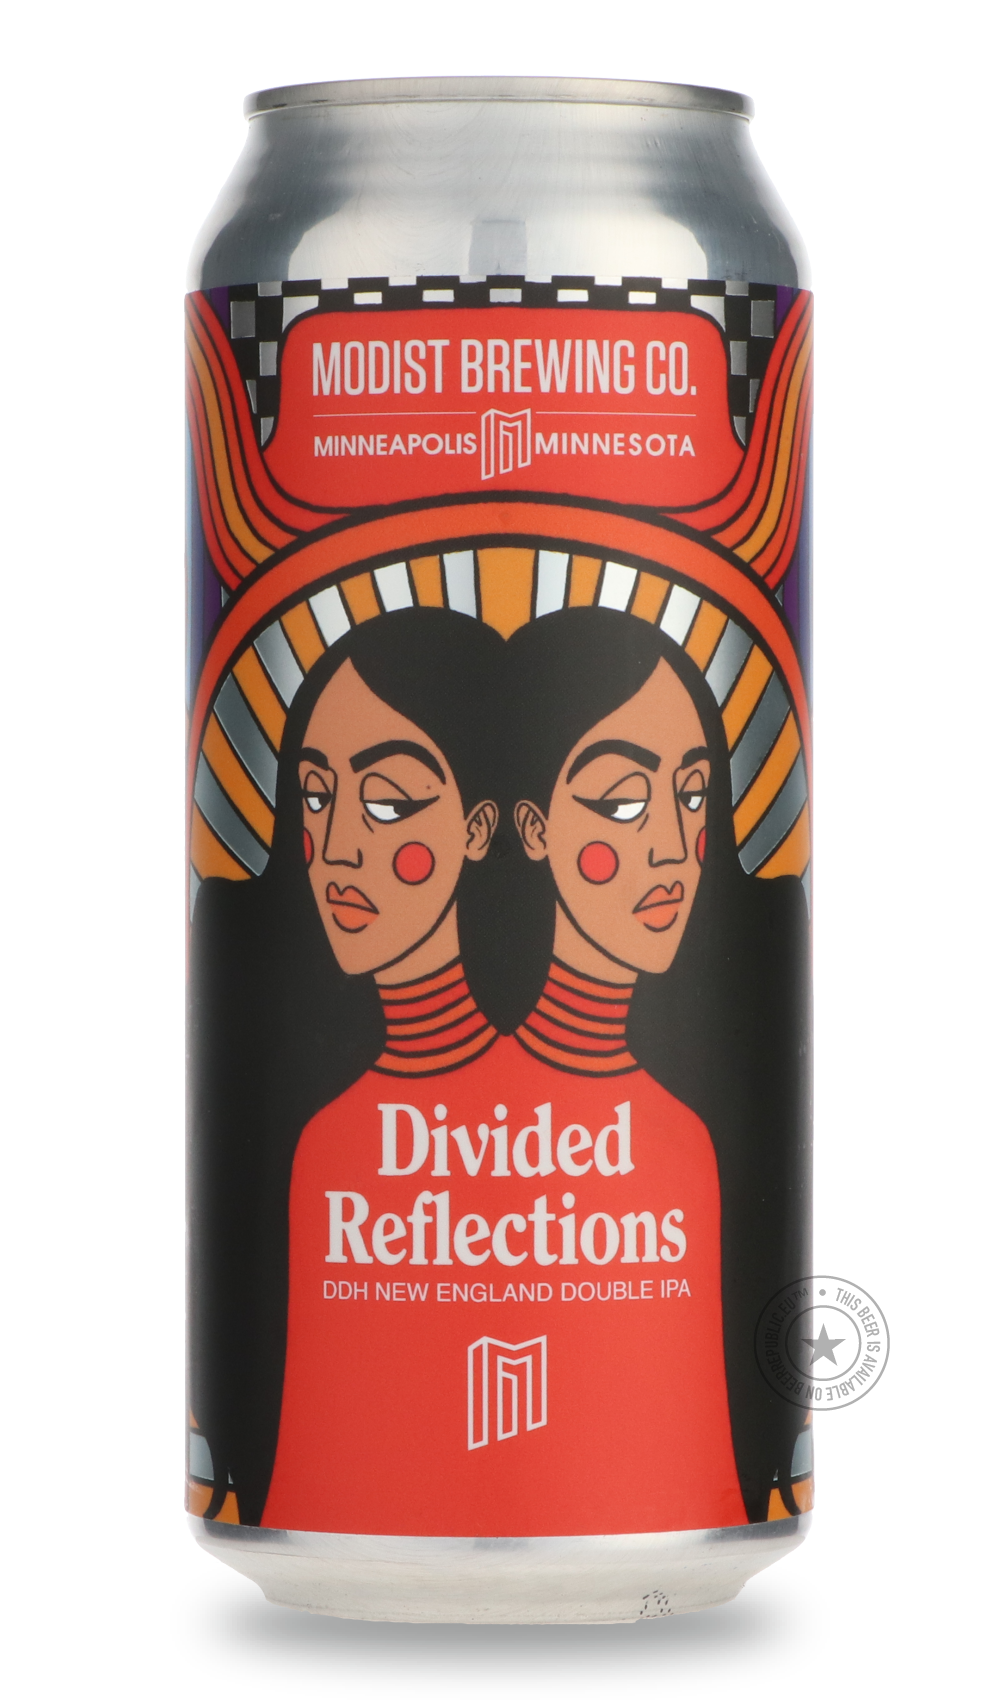 -Modist- Divided Reflections-IPA- Only @ Beer Republic - The best online beer store for American & Canadian craft beer - Buy beer online from the USA and Canada - Bier online kopen - Amerikaans bier kopen - Craft beer store - Craft beer kopen - Amerikanisch bier kaufen - Bier online kaufen - Acheter biere online - IPA - Stout - Porter - New England IPA - Hazy IPA - Imperial Stout - Barrel Aged - Barrel Aged Imperial Stout - Brown - Dark beer - Blond - Blonde - Pilsner - Lager - Wheat - Weizen - Amber - Barl